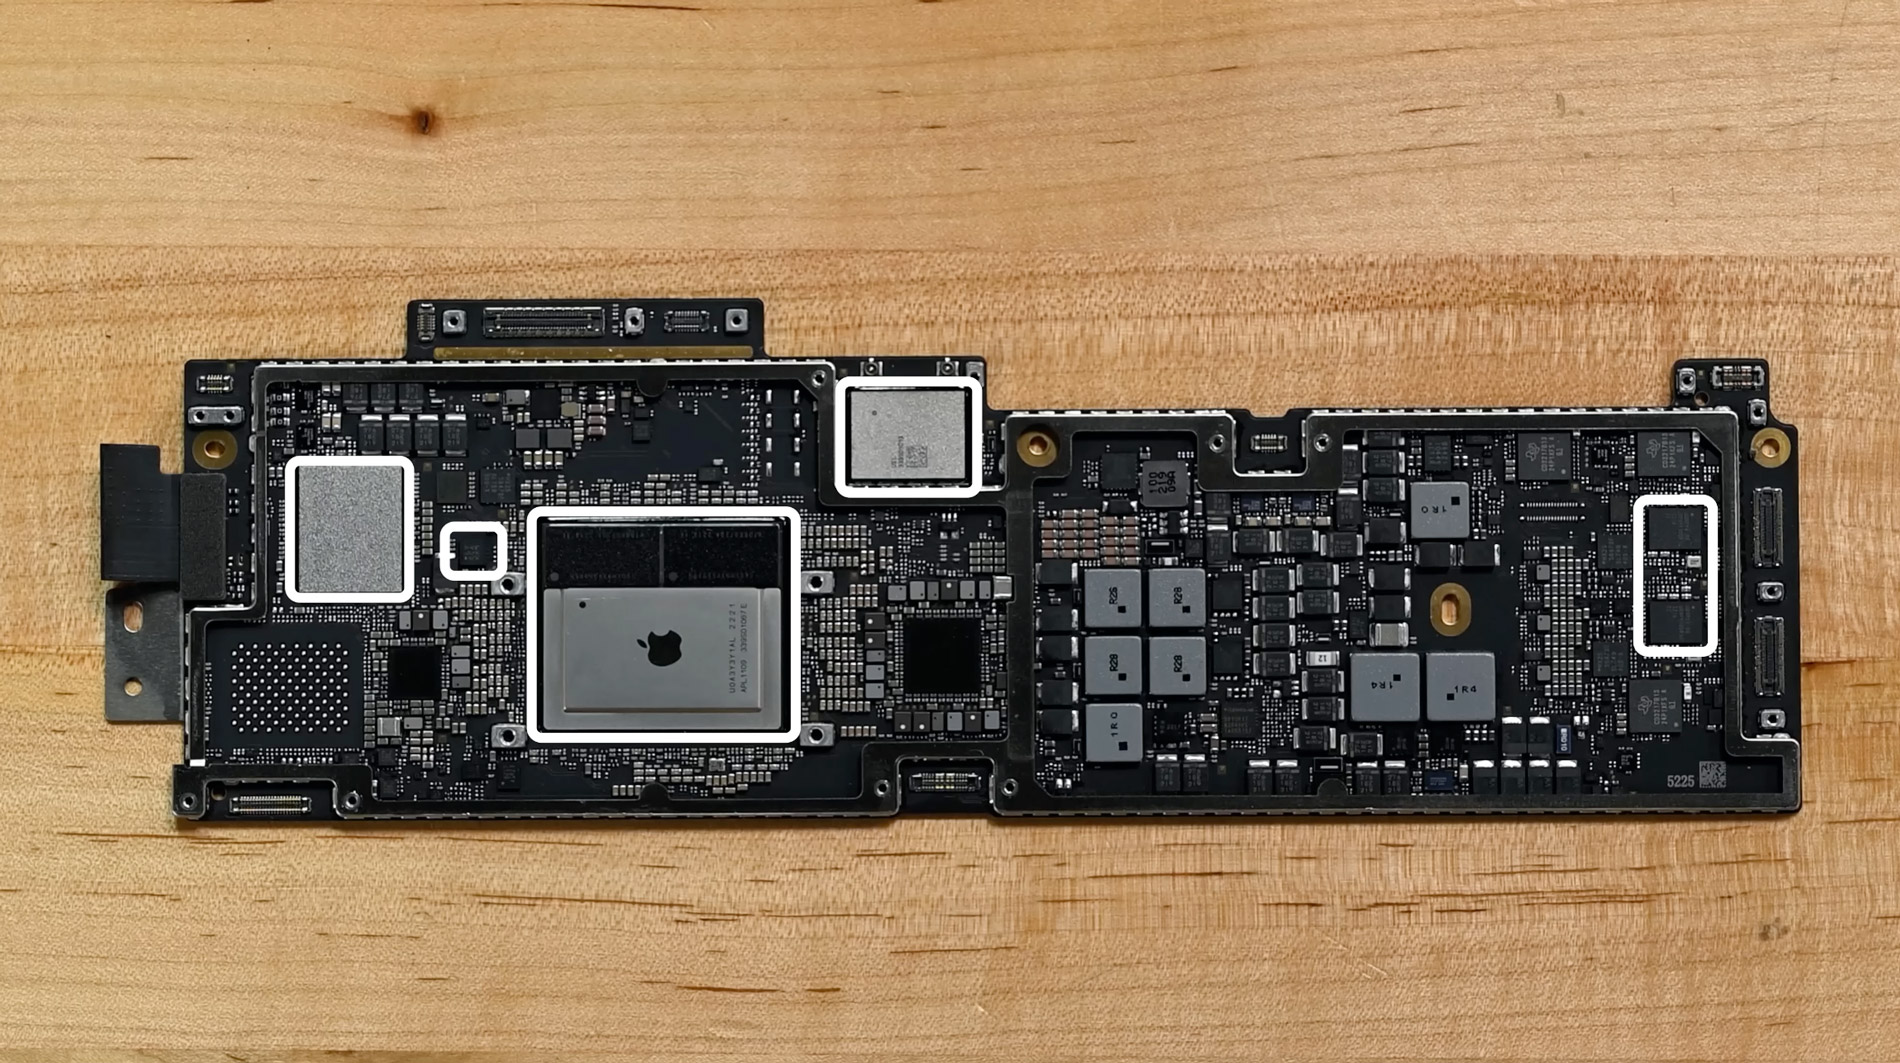 iFixit teardown shows there's not much inside the new M2 MacBook Air.